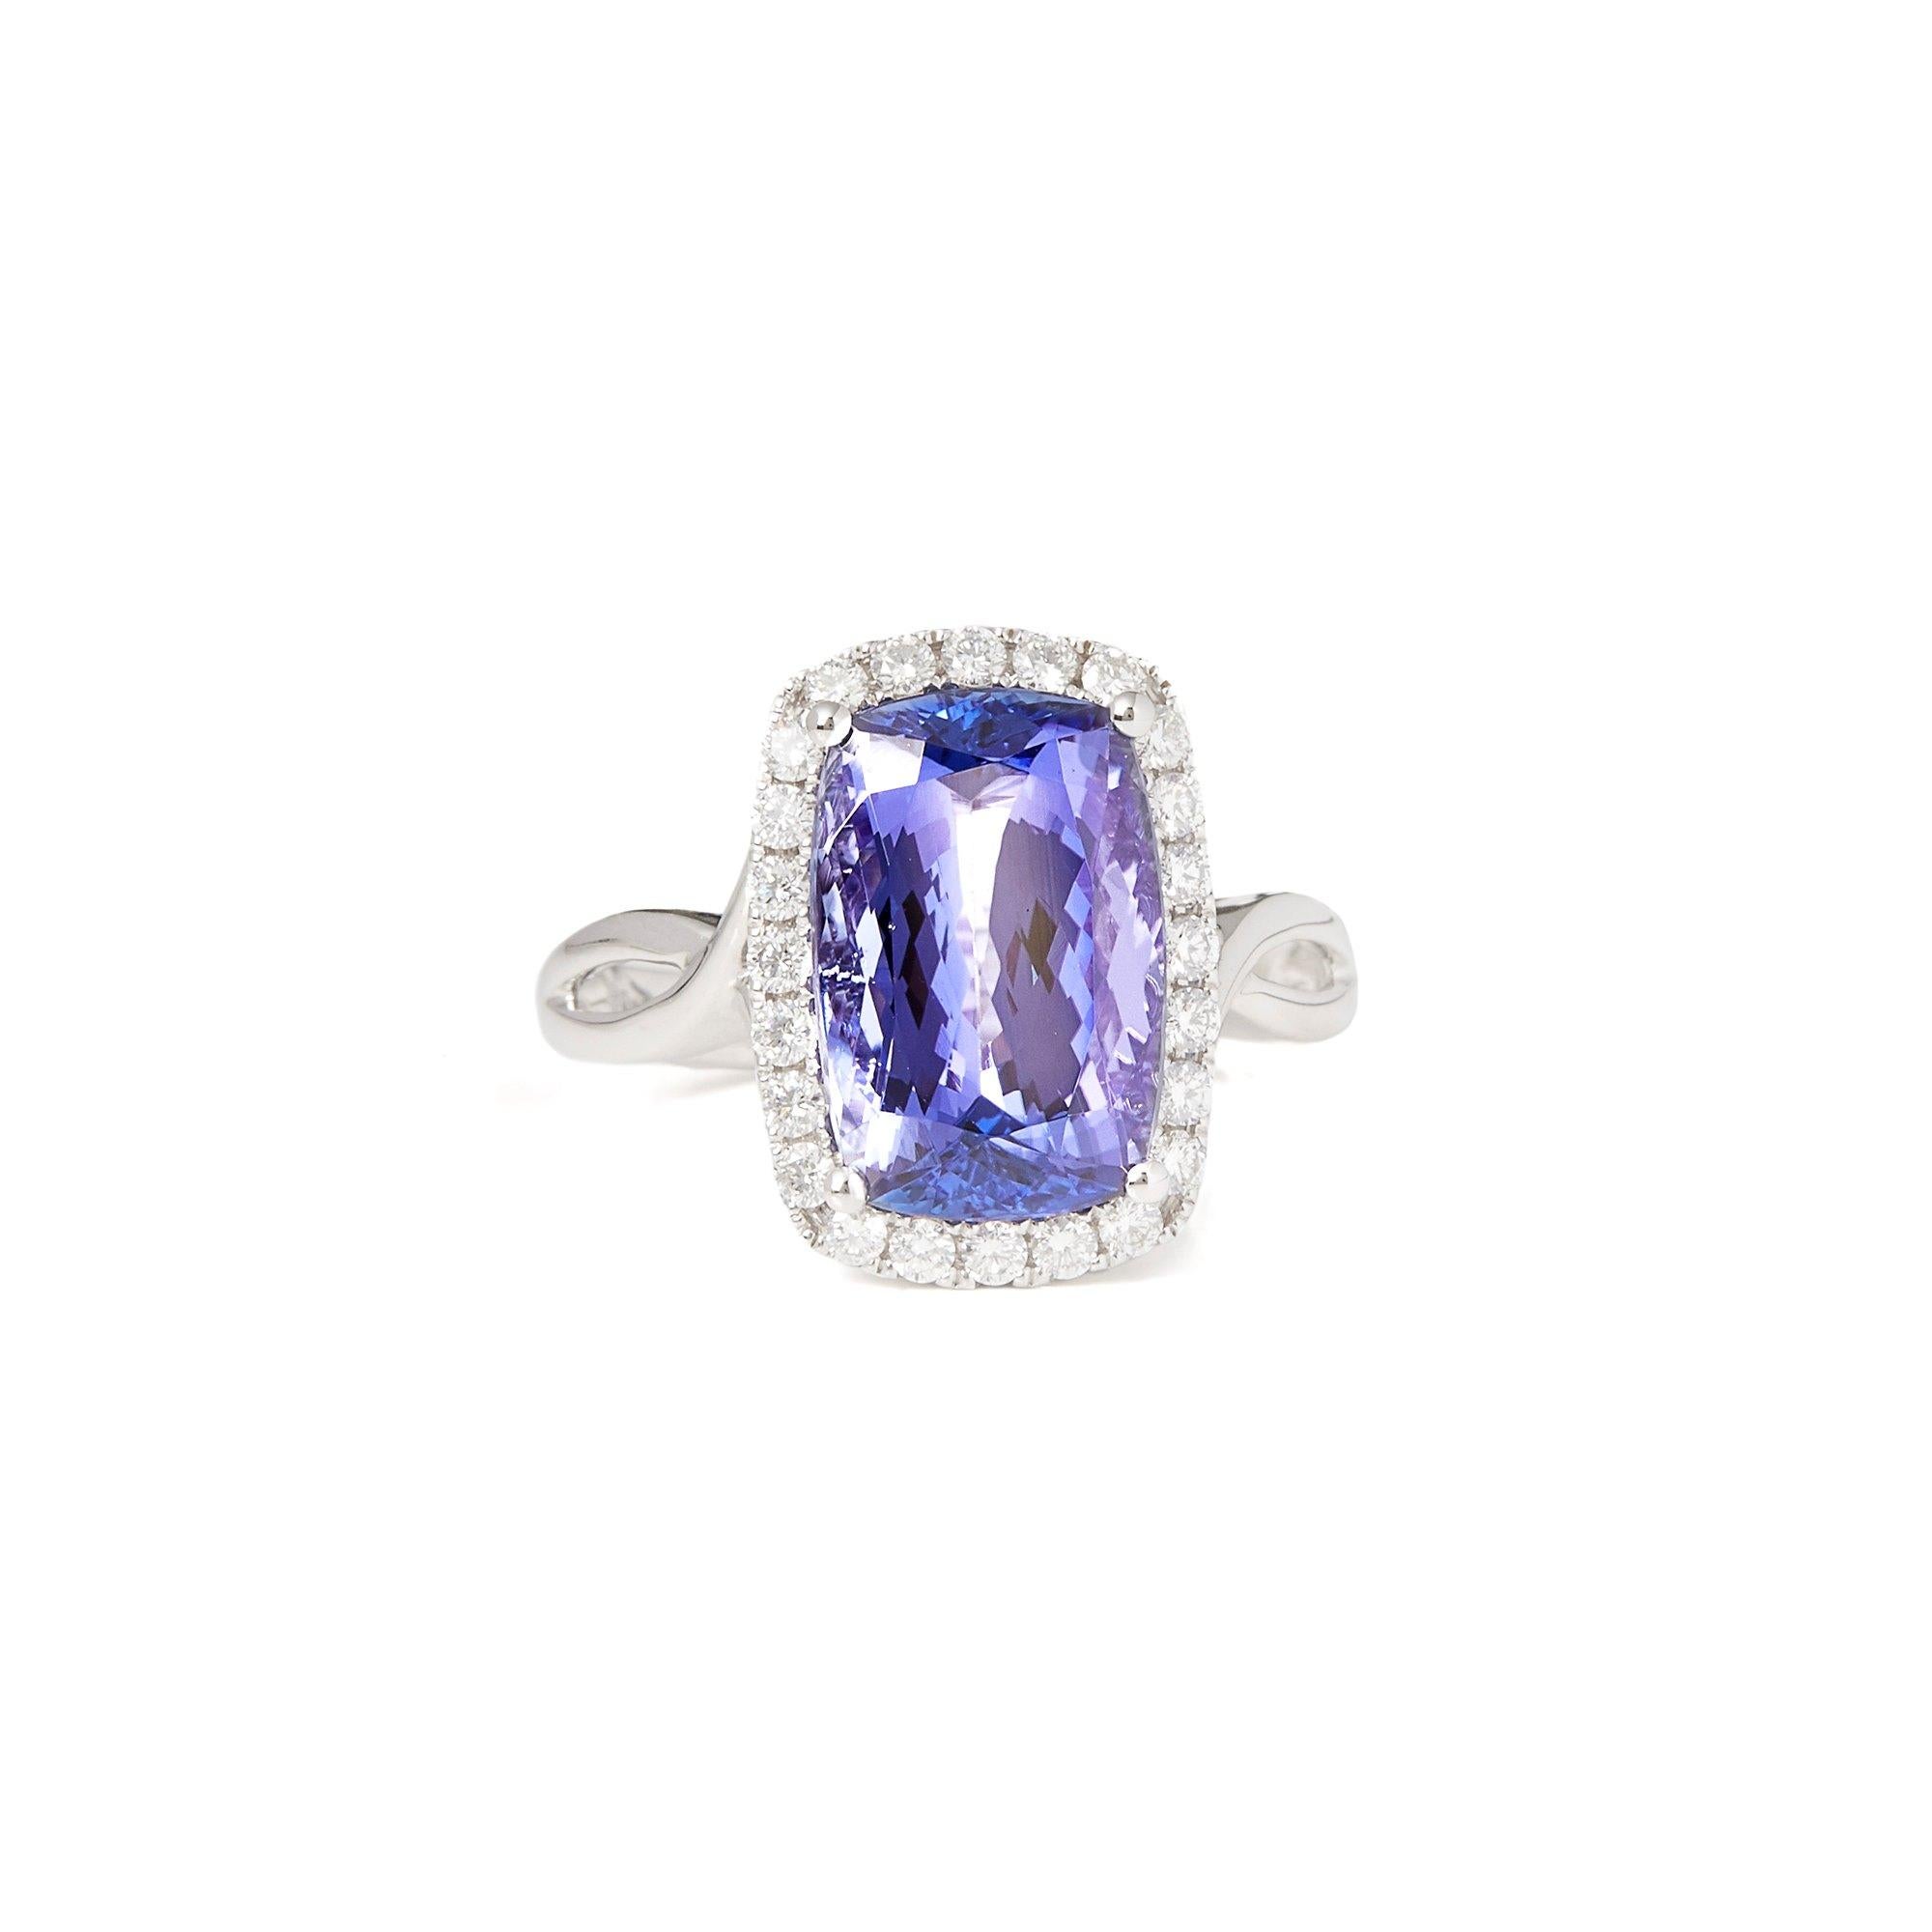 This ring designed by David Jerome is from his private collection and features one cushion cut Tanzanite totalling 5.60cts sourced in the D block mine Tanzania. Set with round brilliant cut Diamonds totalling 0.40cts mounted in an 18k white gold